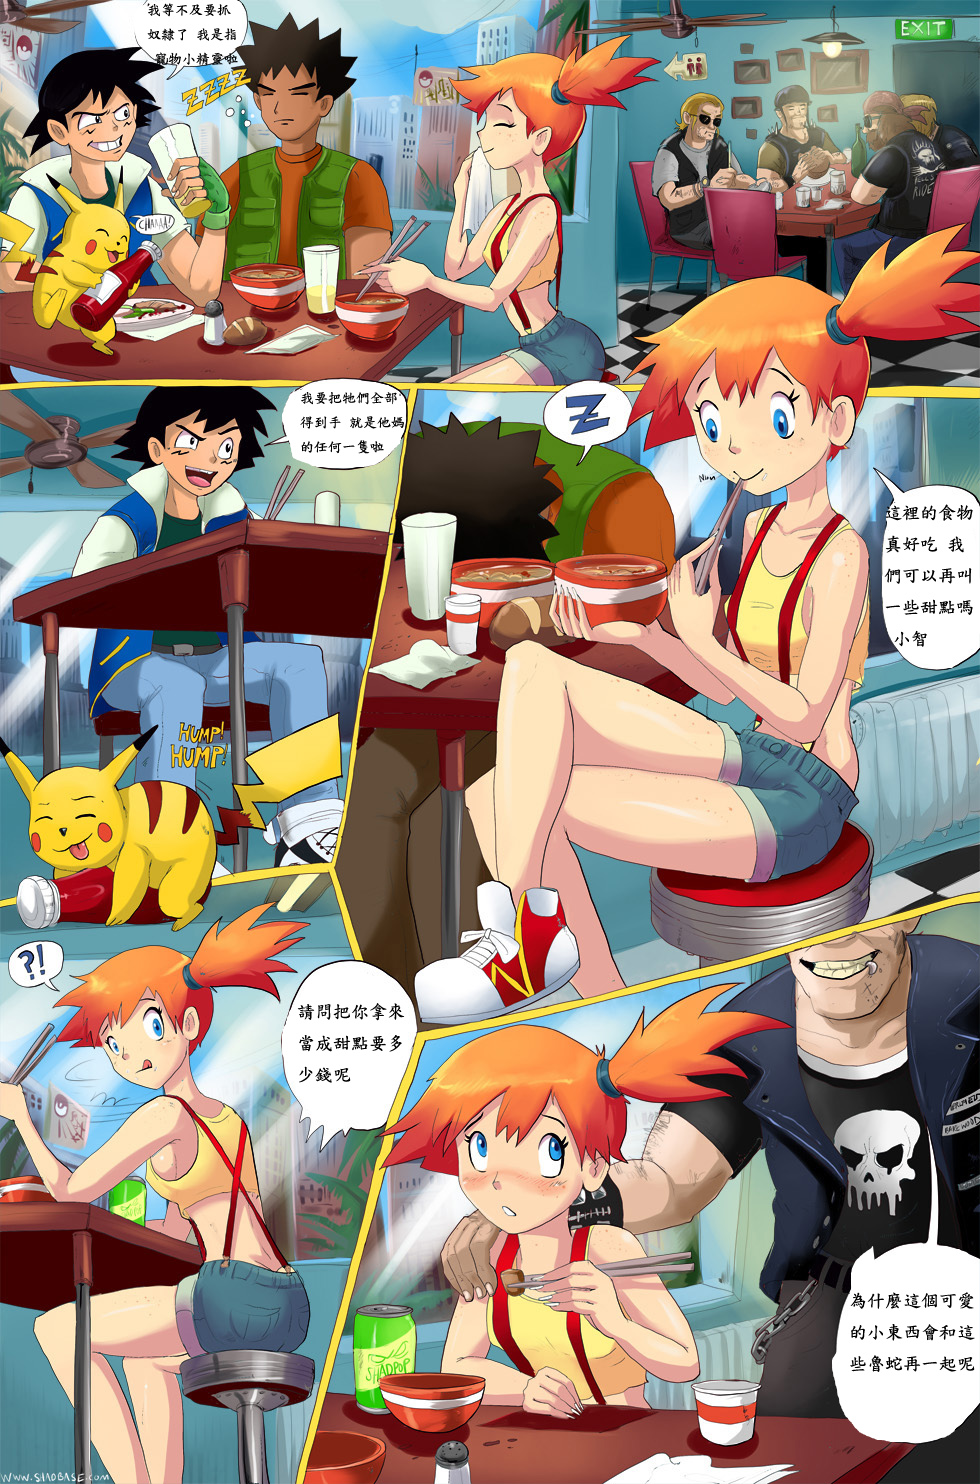 Read [therealshadman] Misty Gets Wet Pokemon [chinese] Hentai Online Porn Manga And Doujinshi